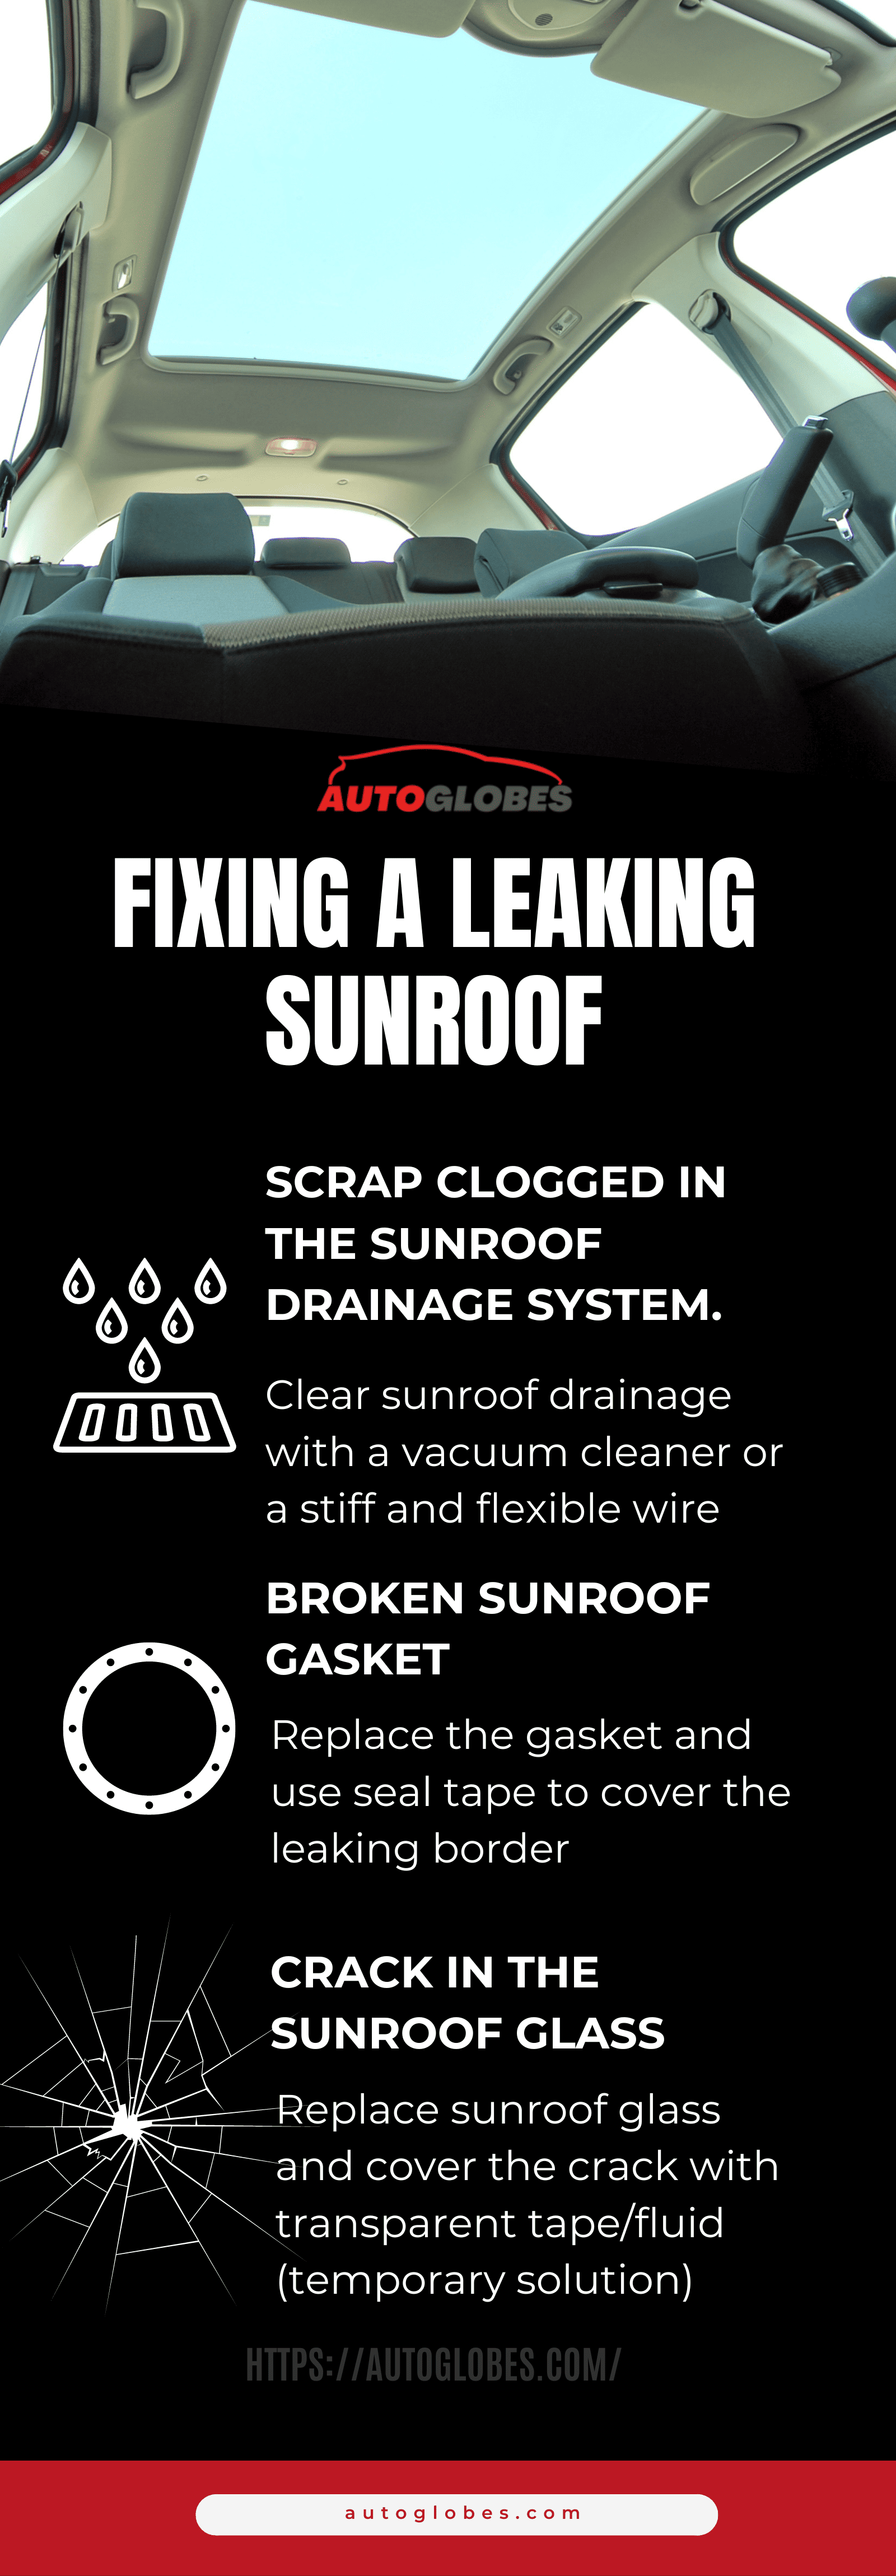 Fixing a Leaking Sunroof Infographic